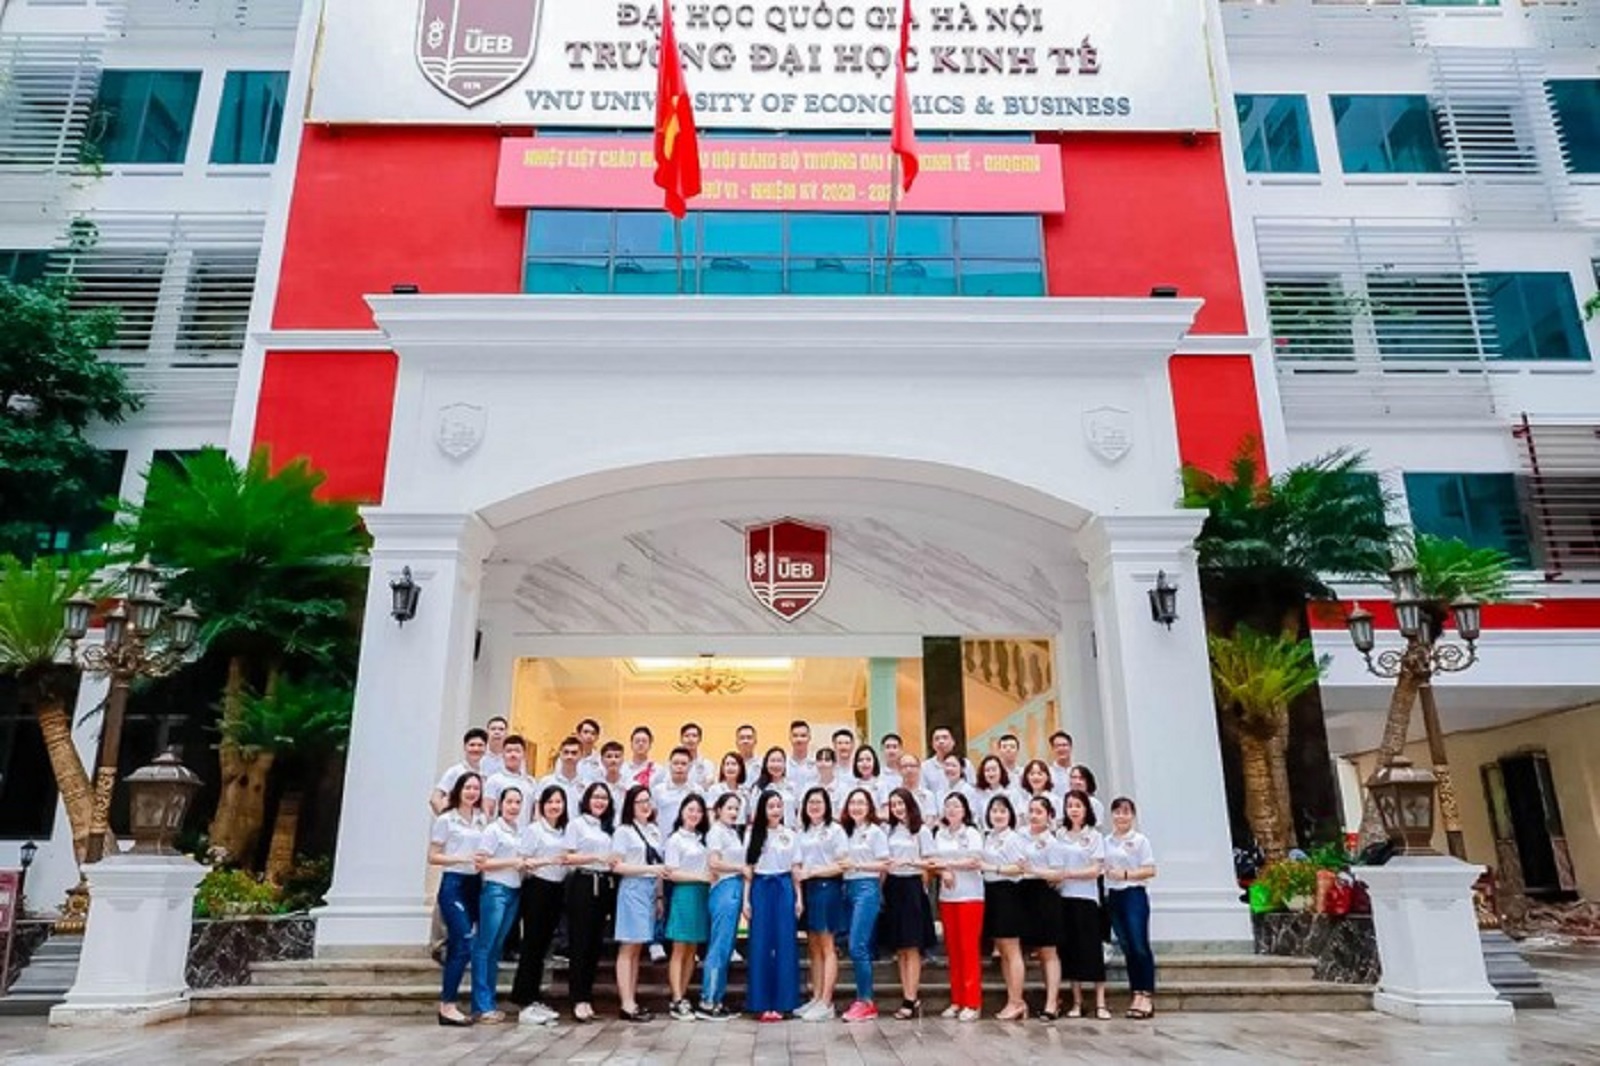 For the first time, a Vietnamese public university has been ranked by THE in the field of economics and business